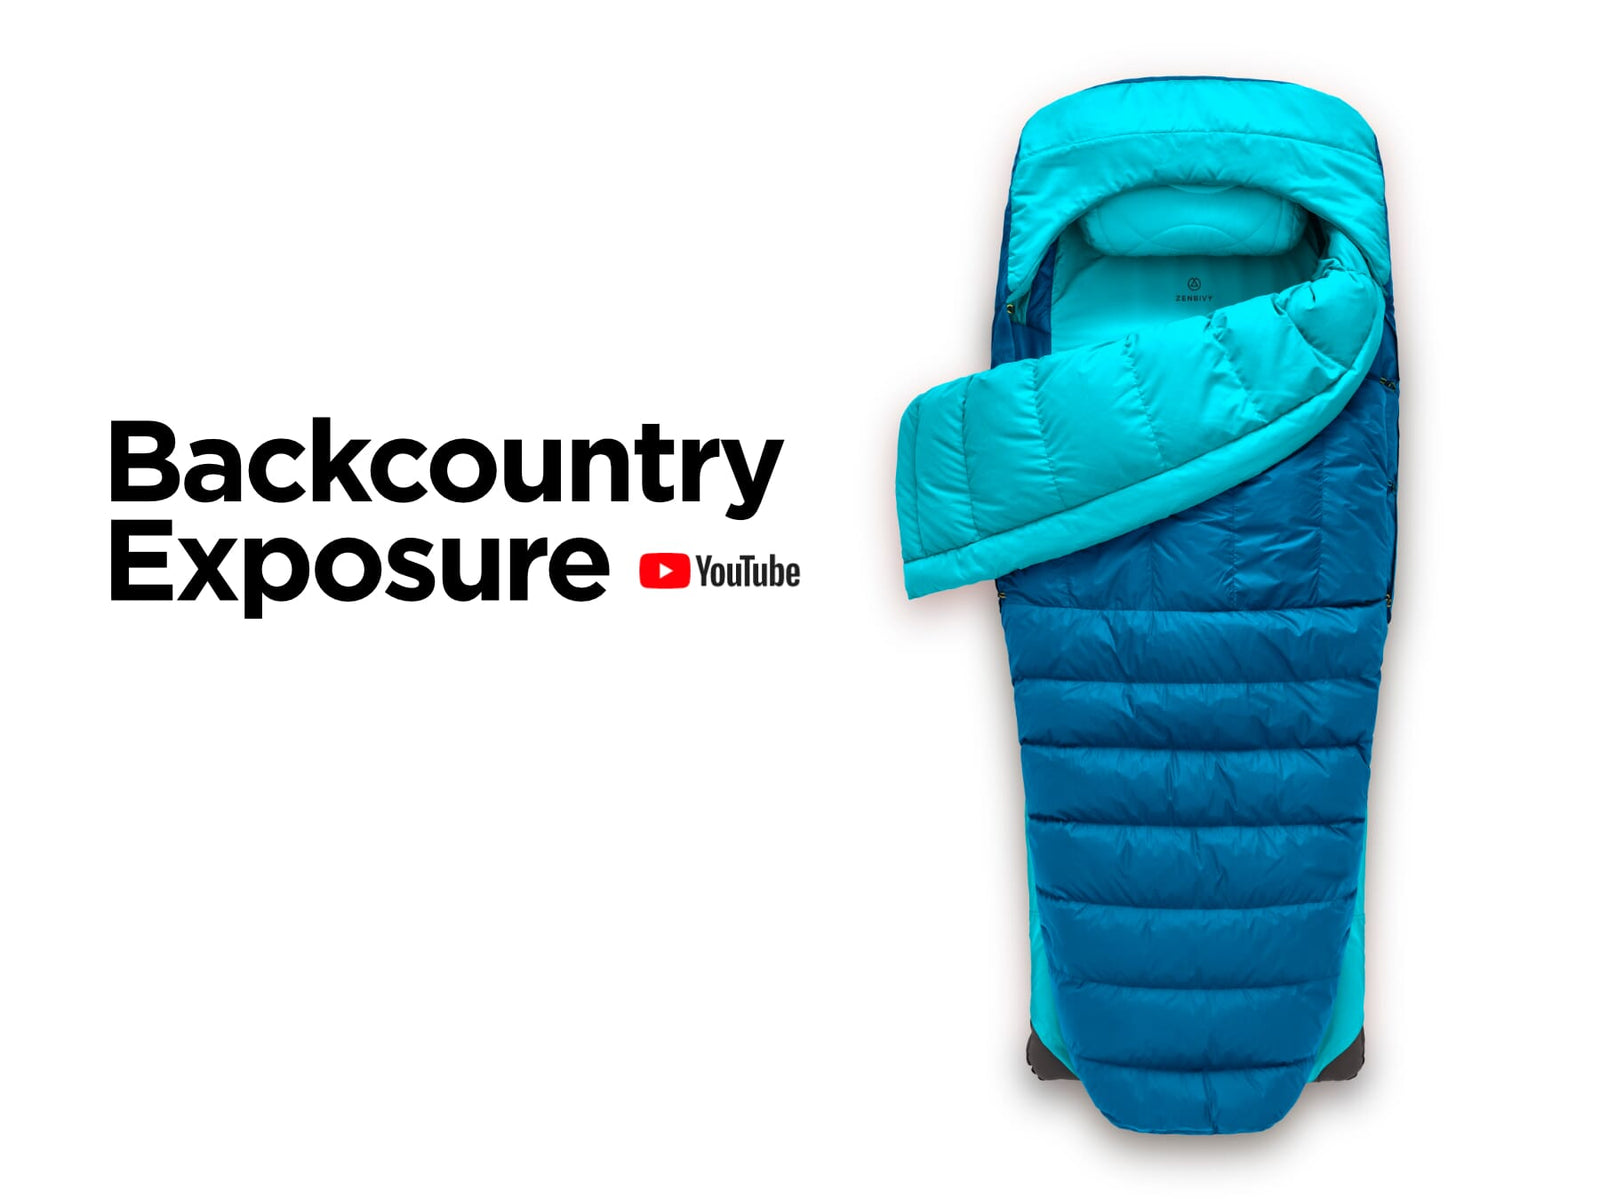 WATCH: Backcountry Exposure reviews the Core Bed